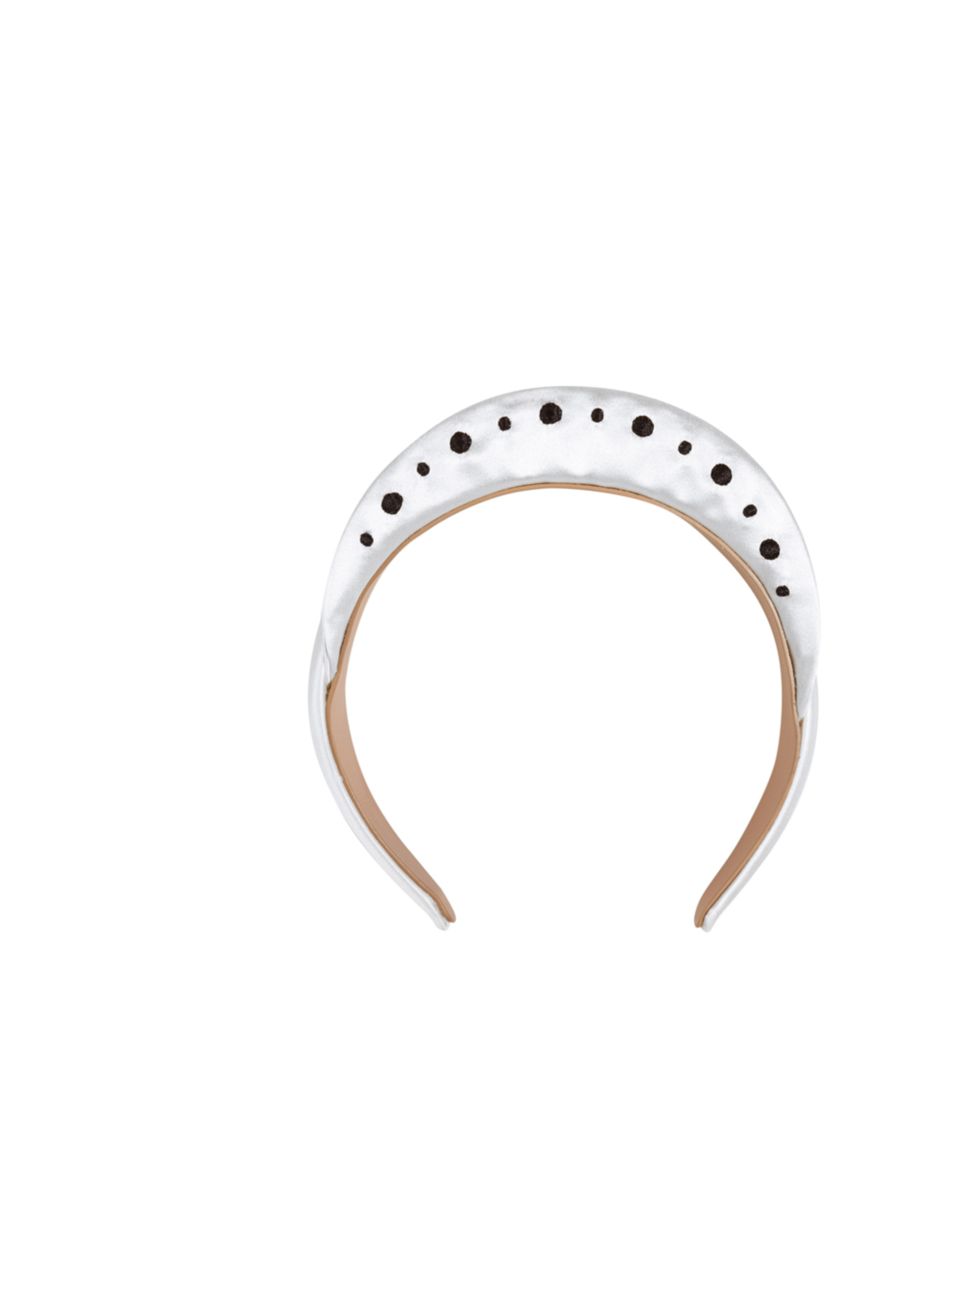 <p>For a chic alternative to the classic wedding hat, Jil Sanders uber cool Perspex headband is just the ticketJil Sander Navy headband, £170, at Stylebop</p><p><a href="http://shopping.elleuk.com/browse?fts=jil+sander+navy+headband">BUY NOW</a></p>